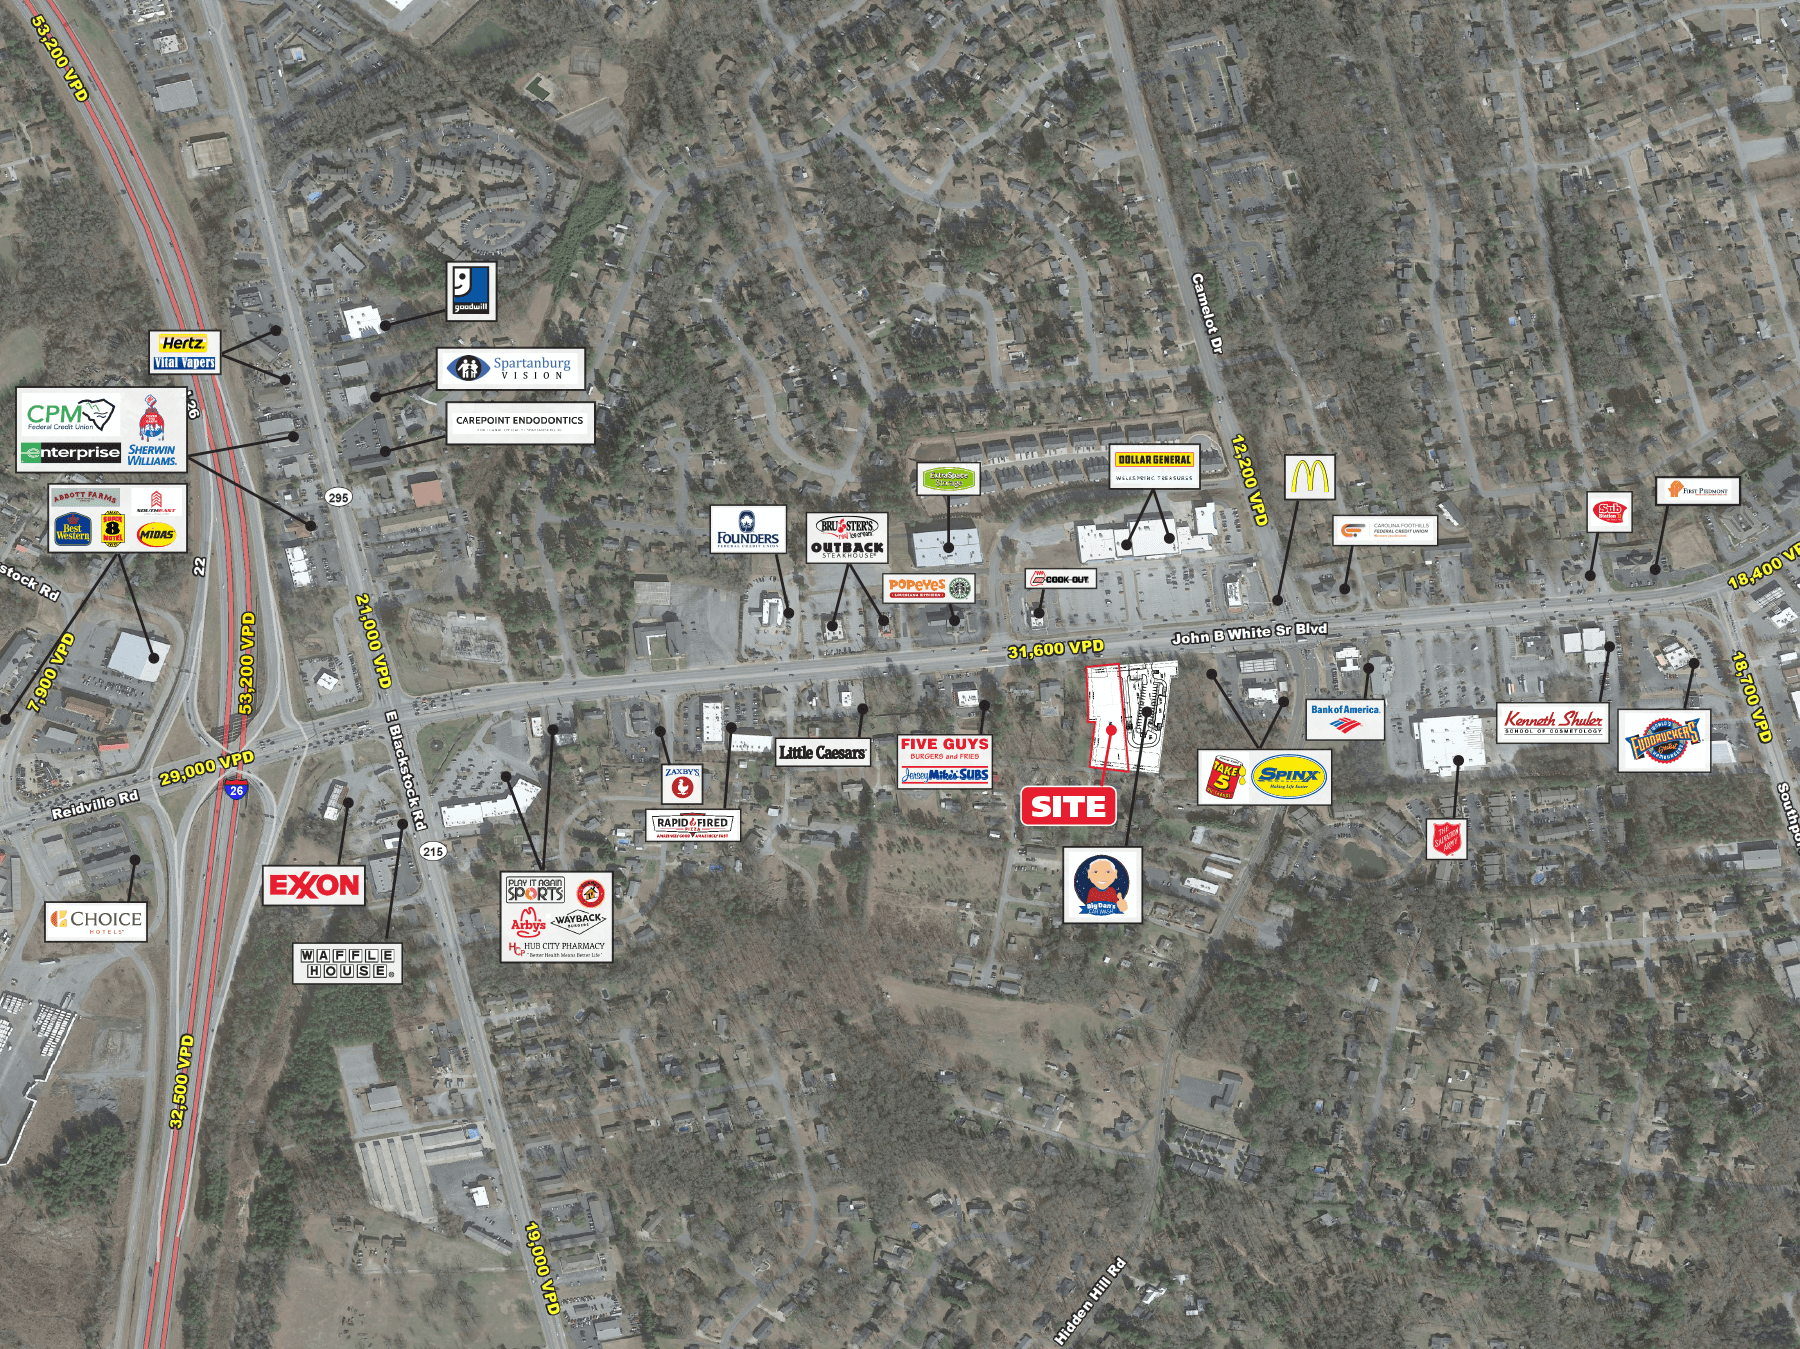 ±1.5 ACRE OUTPARCEL AVAILABLE IN SPARTANBURG